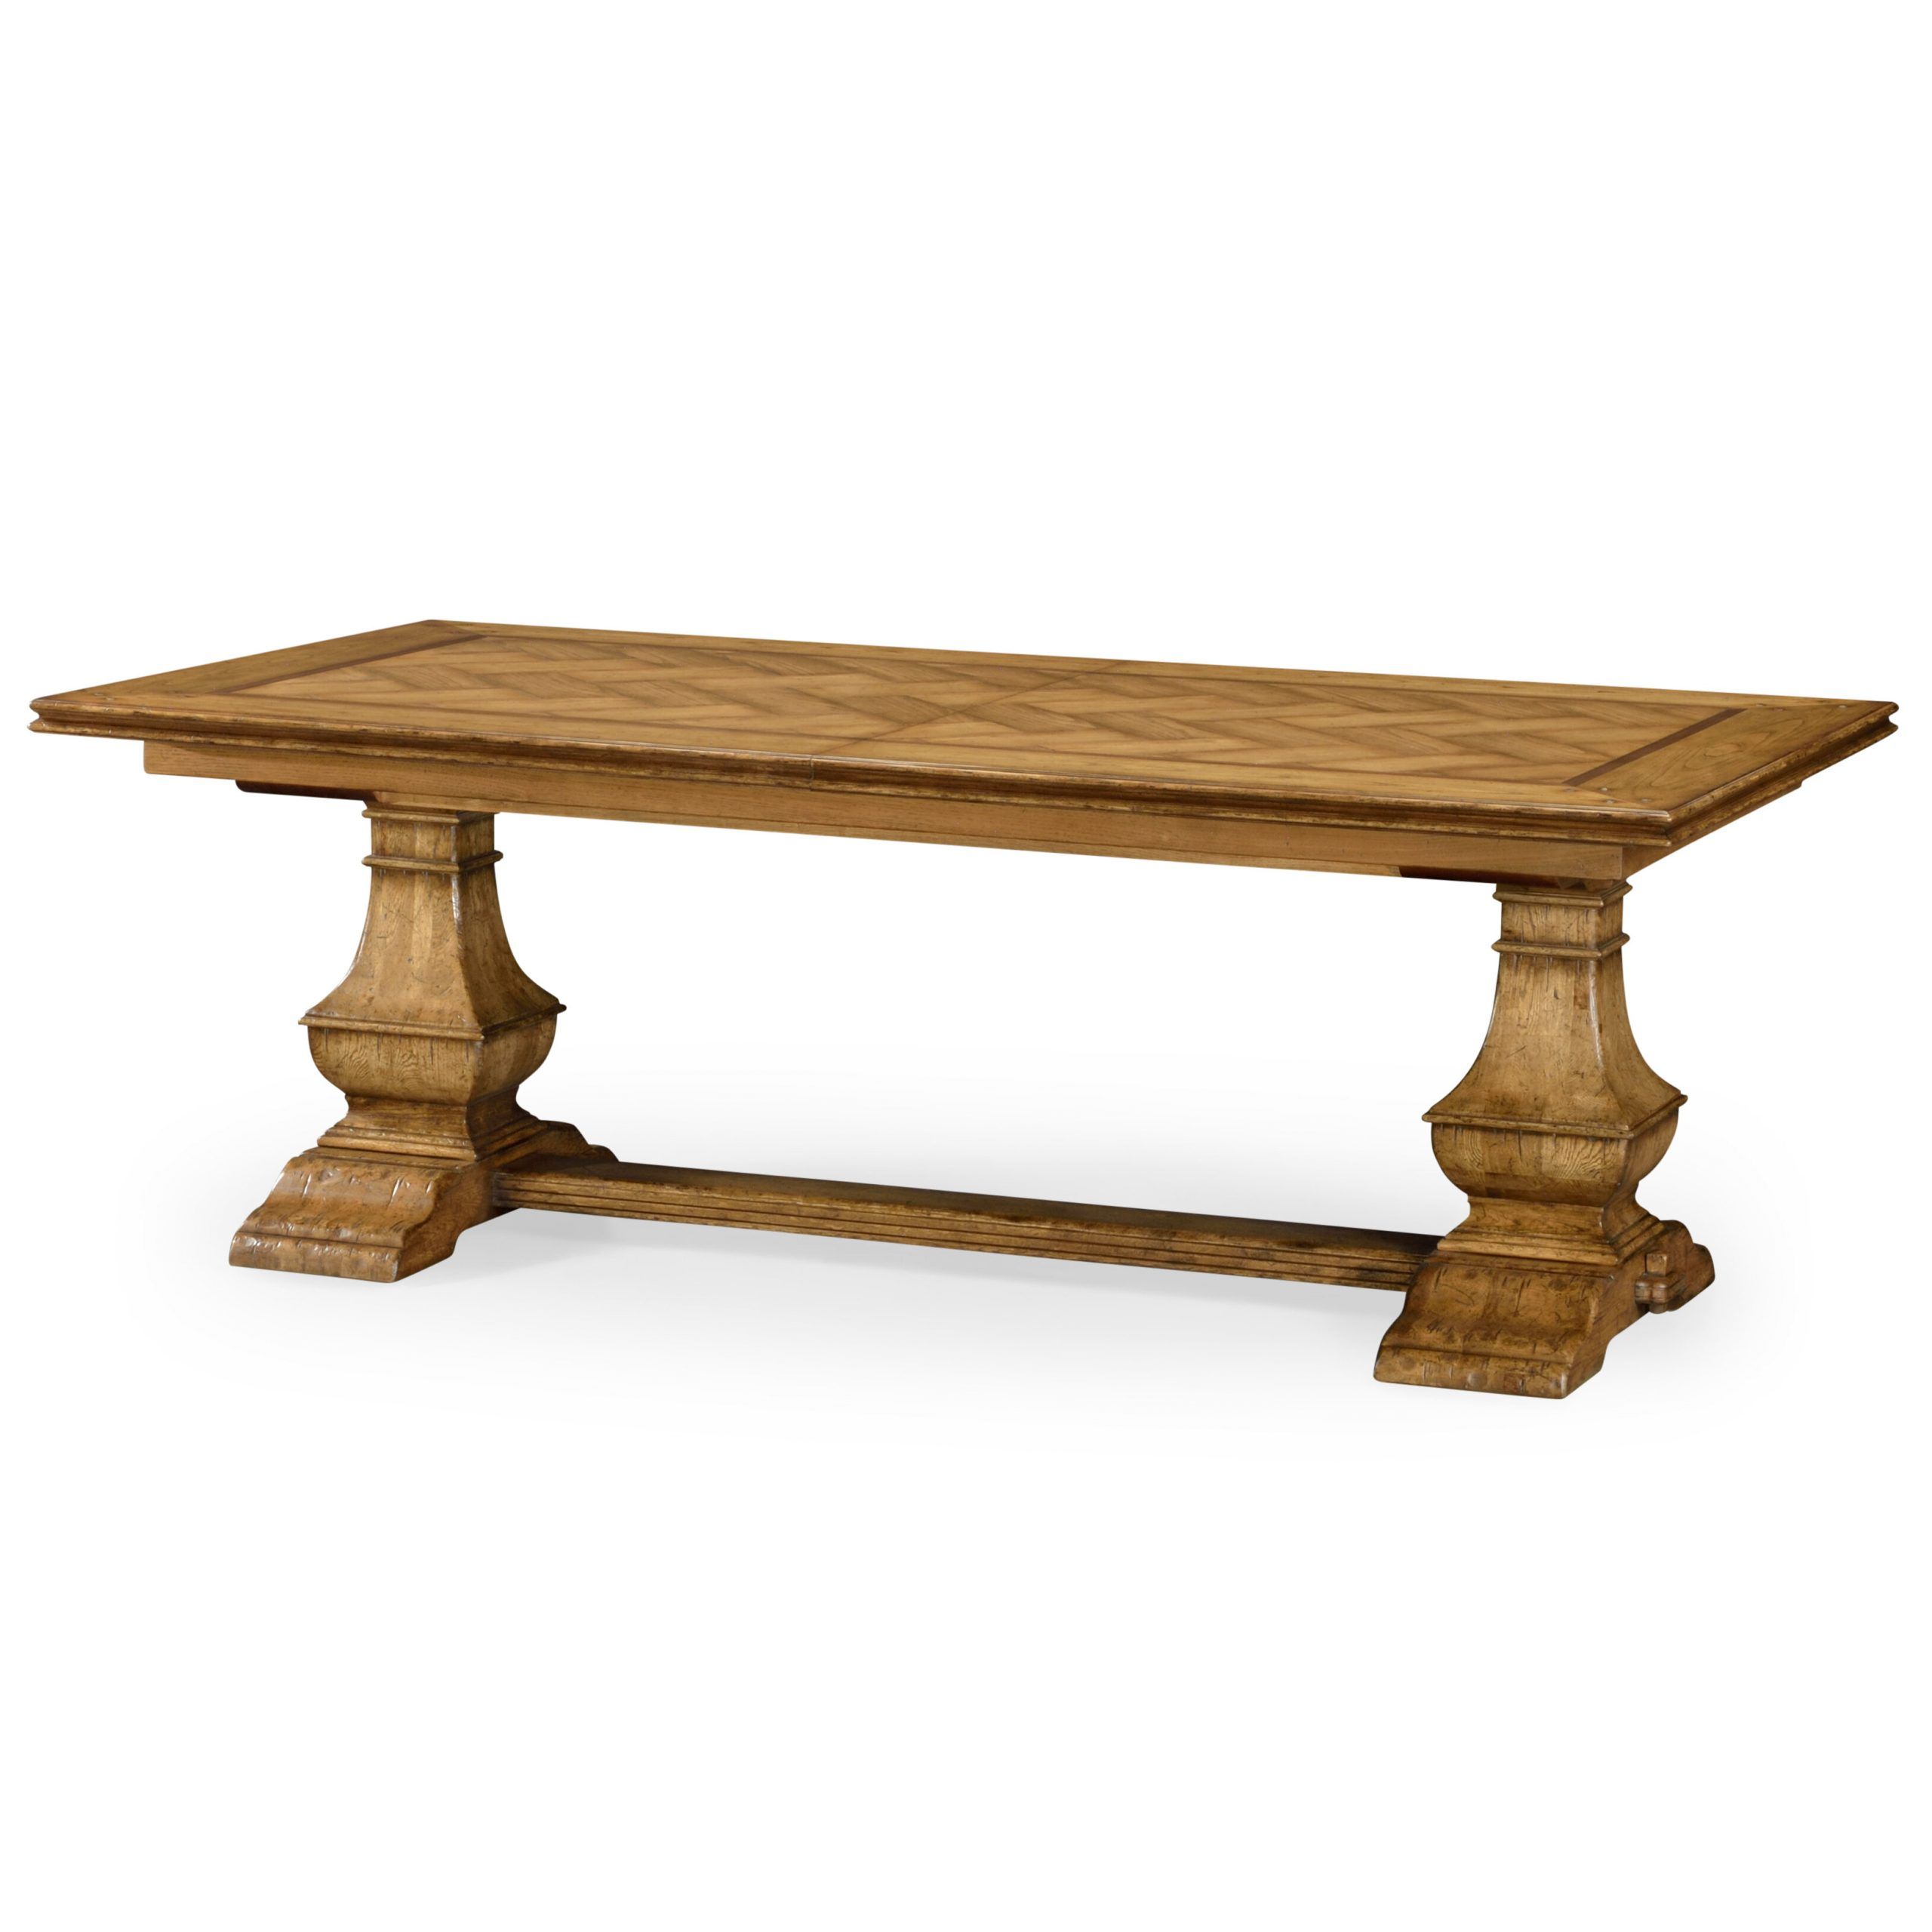 Walnut Solid Wood Garden Benches Throughout Most Up To Date Drop Leaf Walnut Solid Wood Dining Table (View 24 of 30)